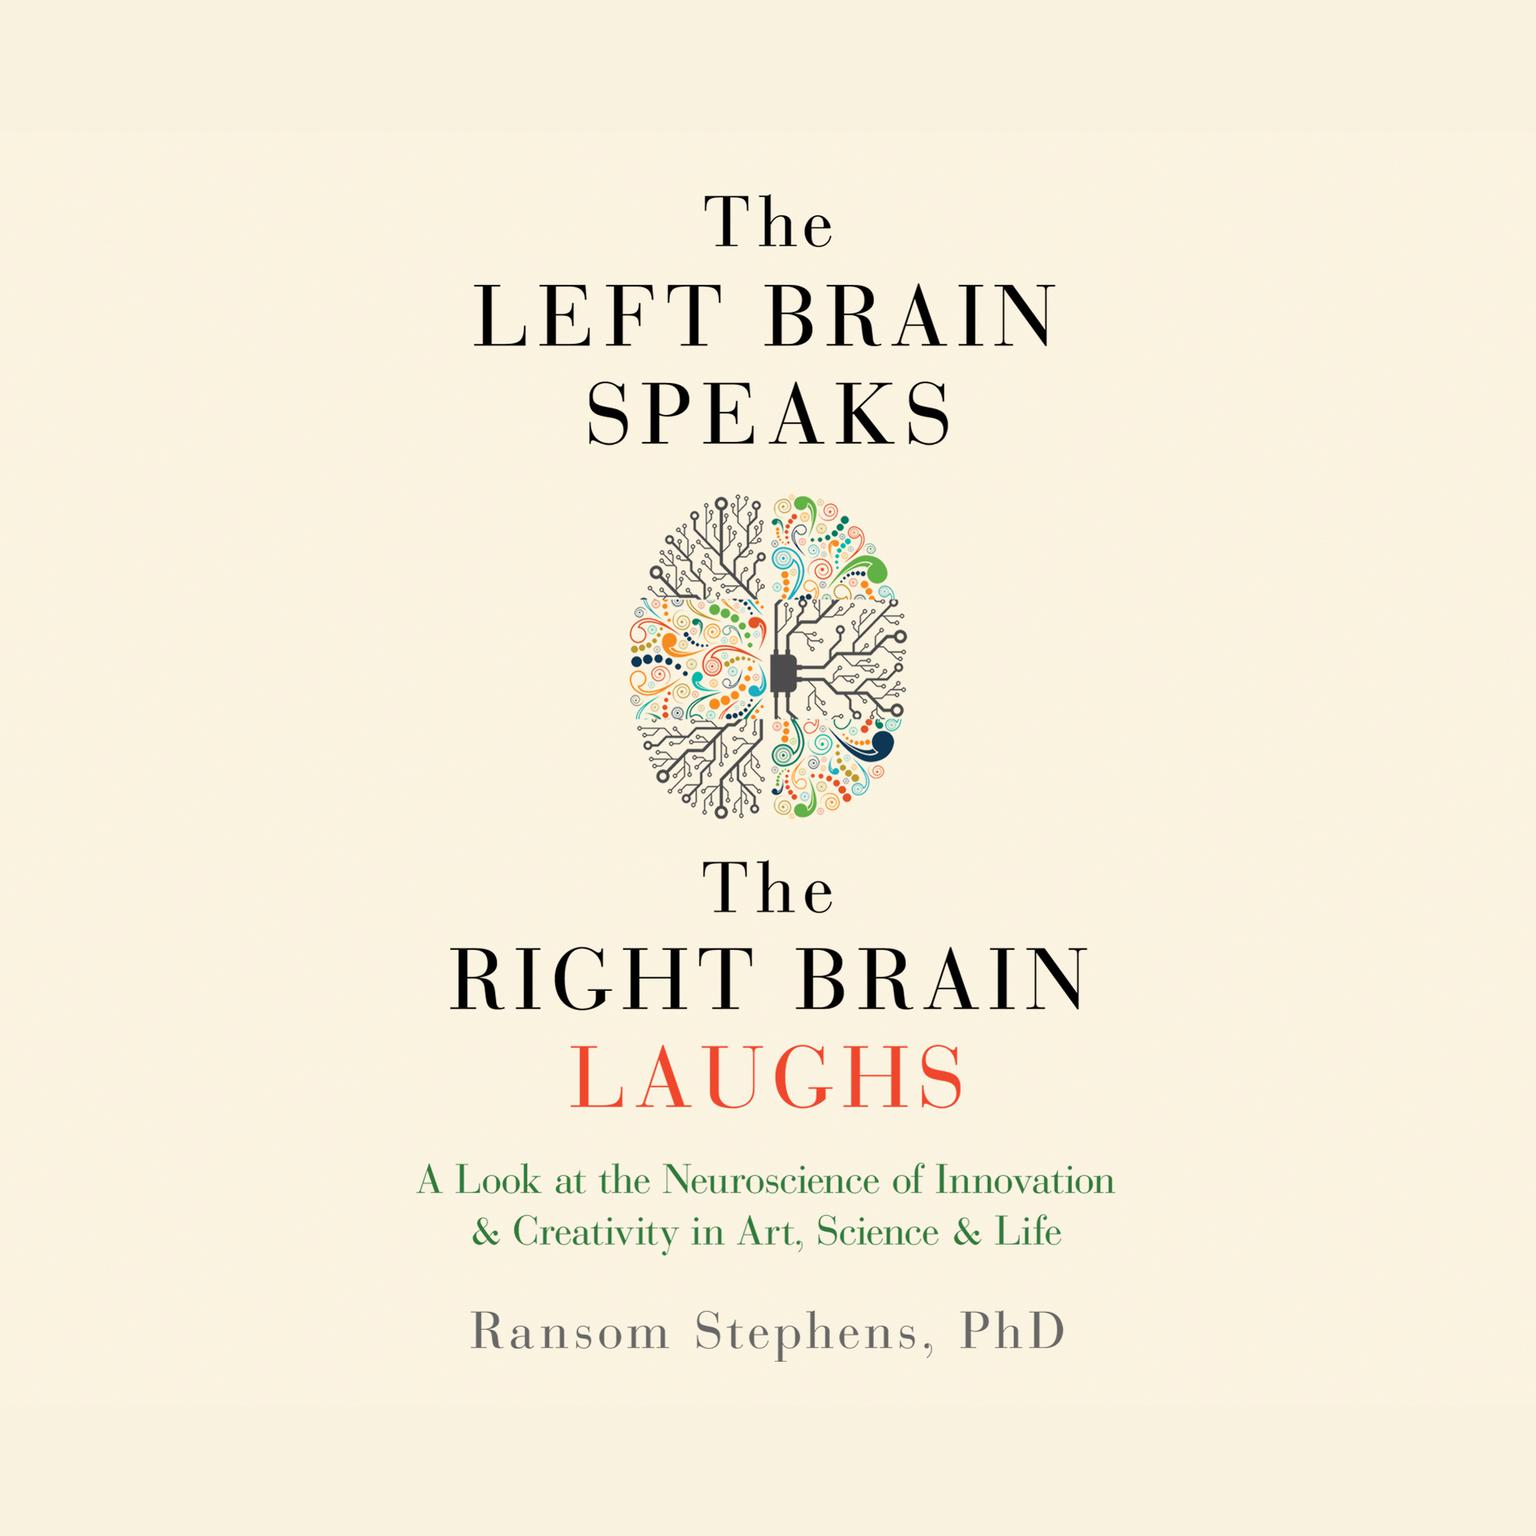 The Left Brain Speaks, the Right Brain Laughs: A Look at the Neuroscience of Innovation & Creativity in Art, Science & Life Audiobook, by Ransom Stephens